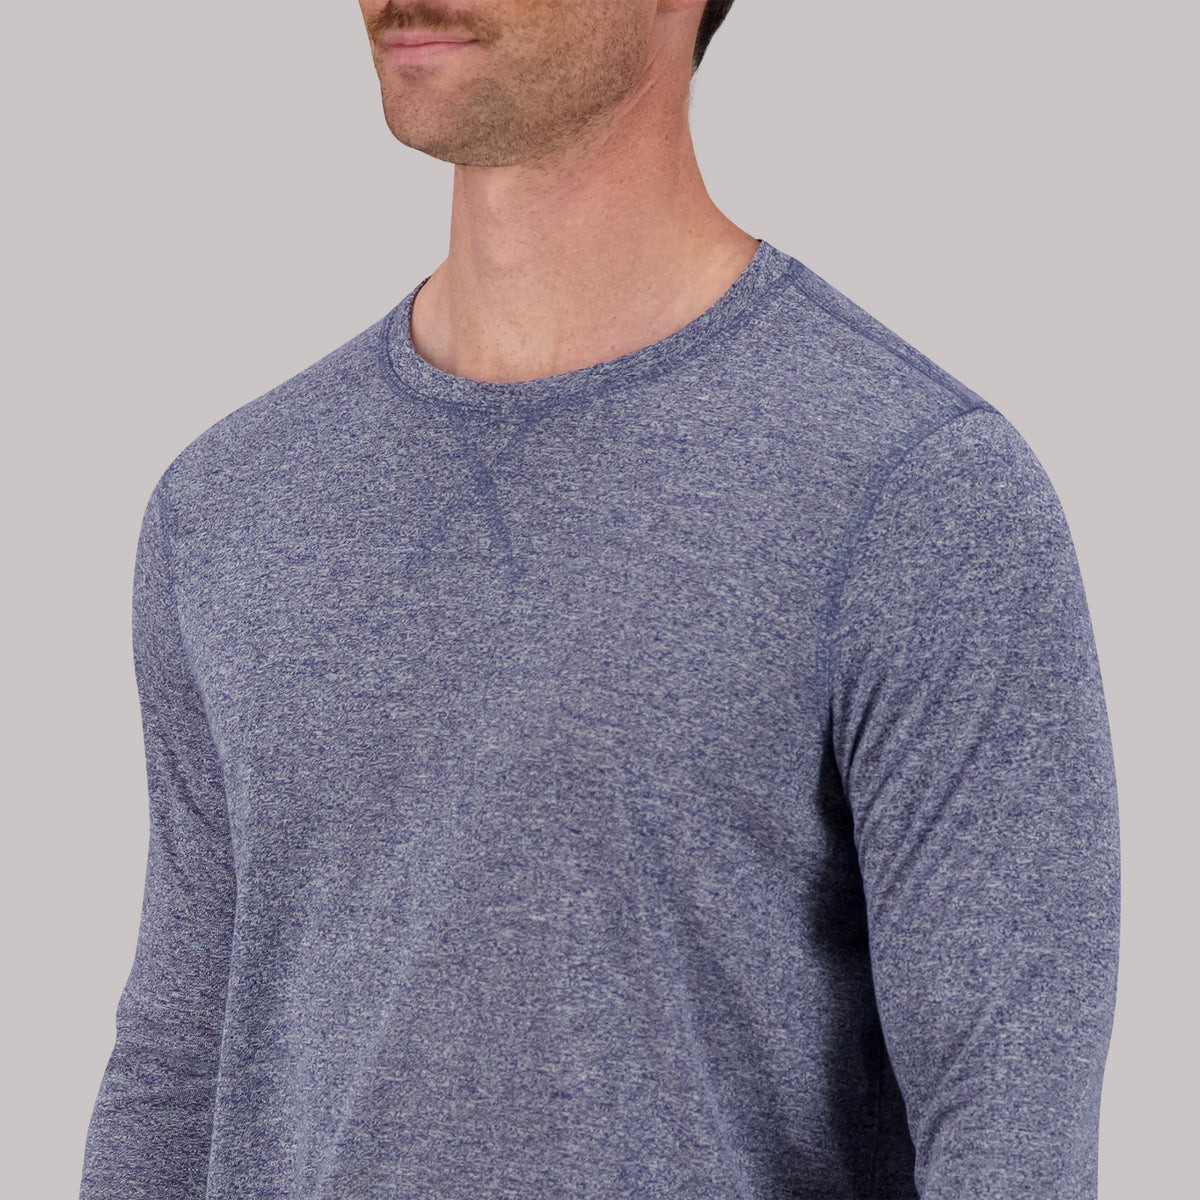 Long Sleeve Cotton/Poly Crew Neck Grindal Knit in Violet